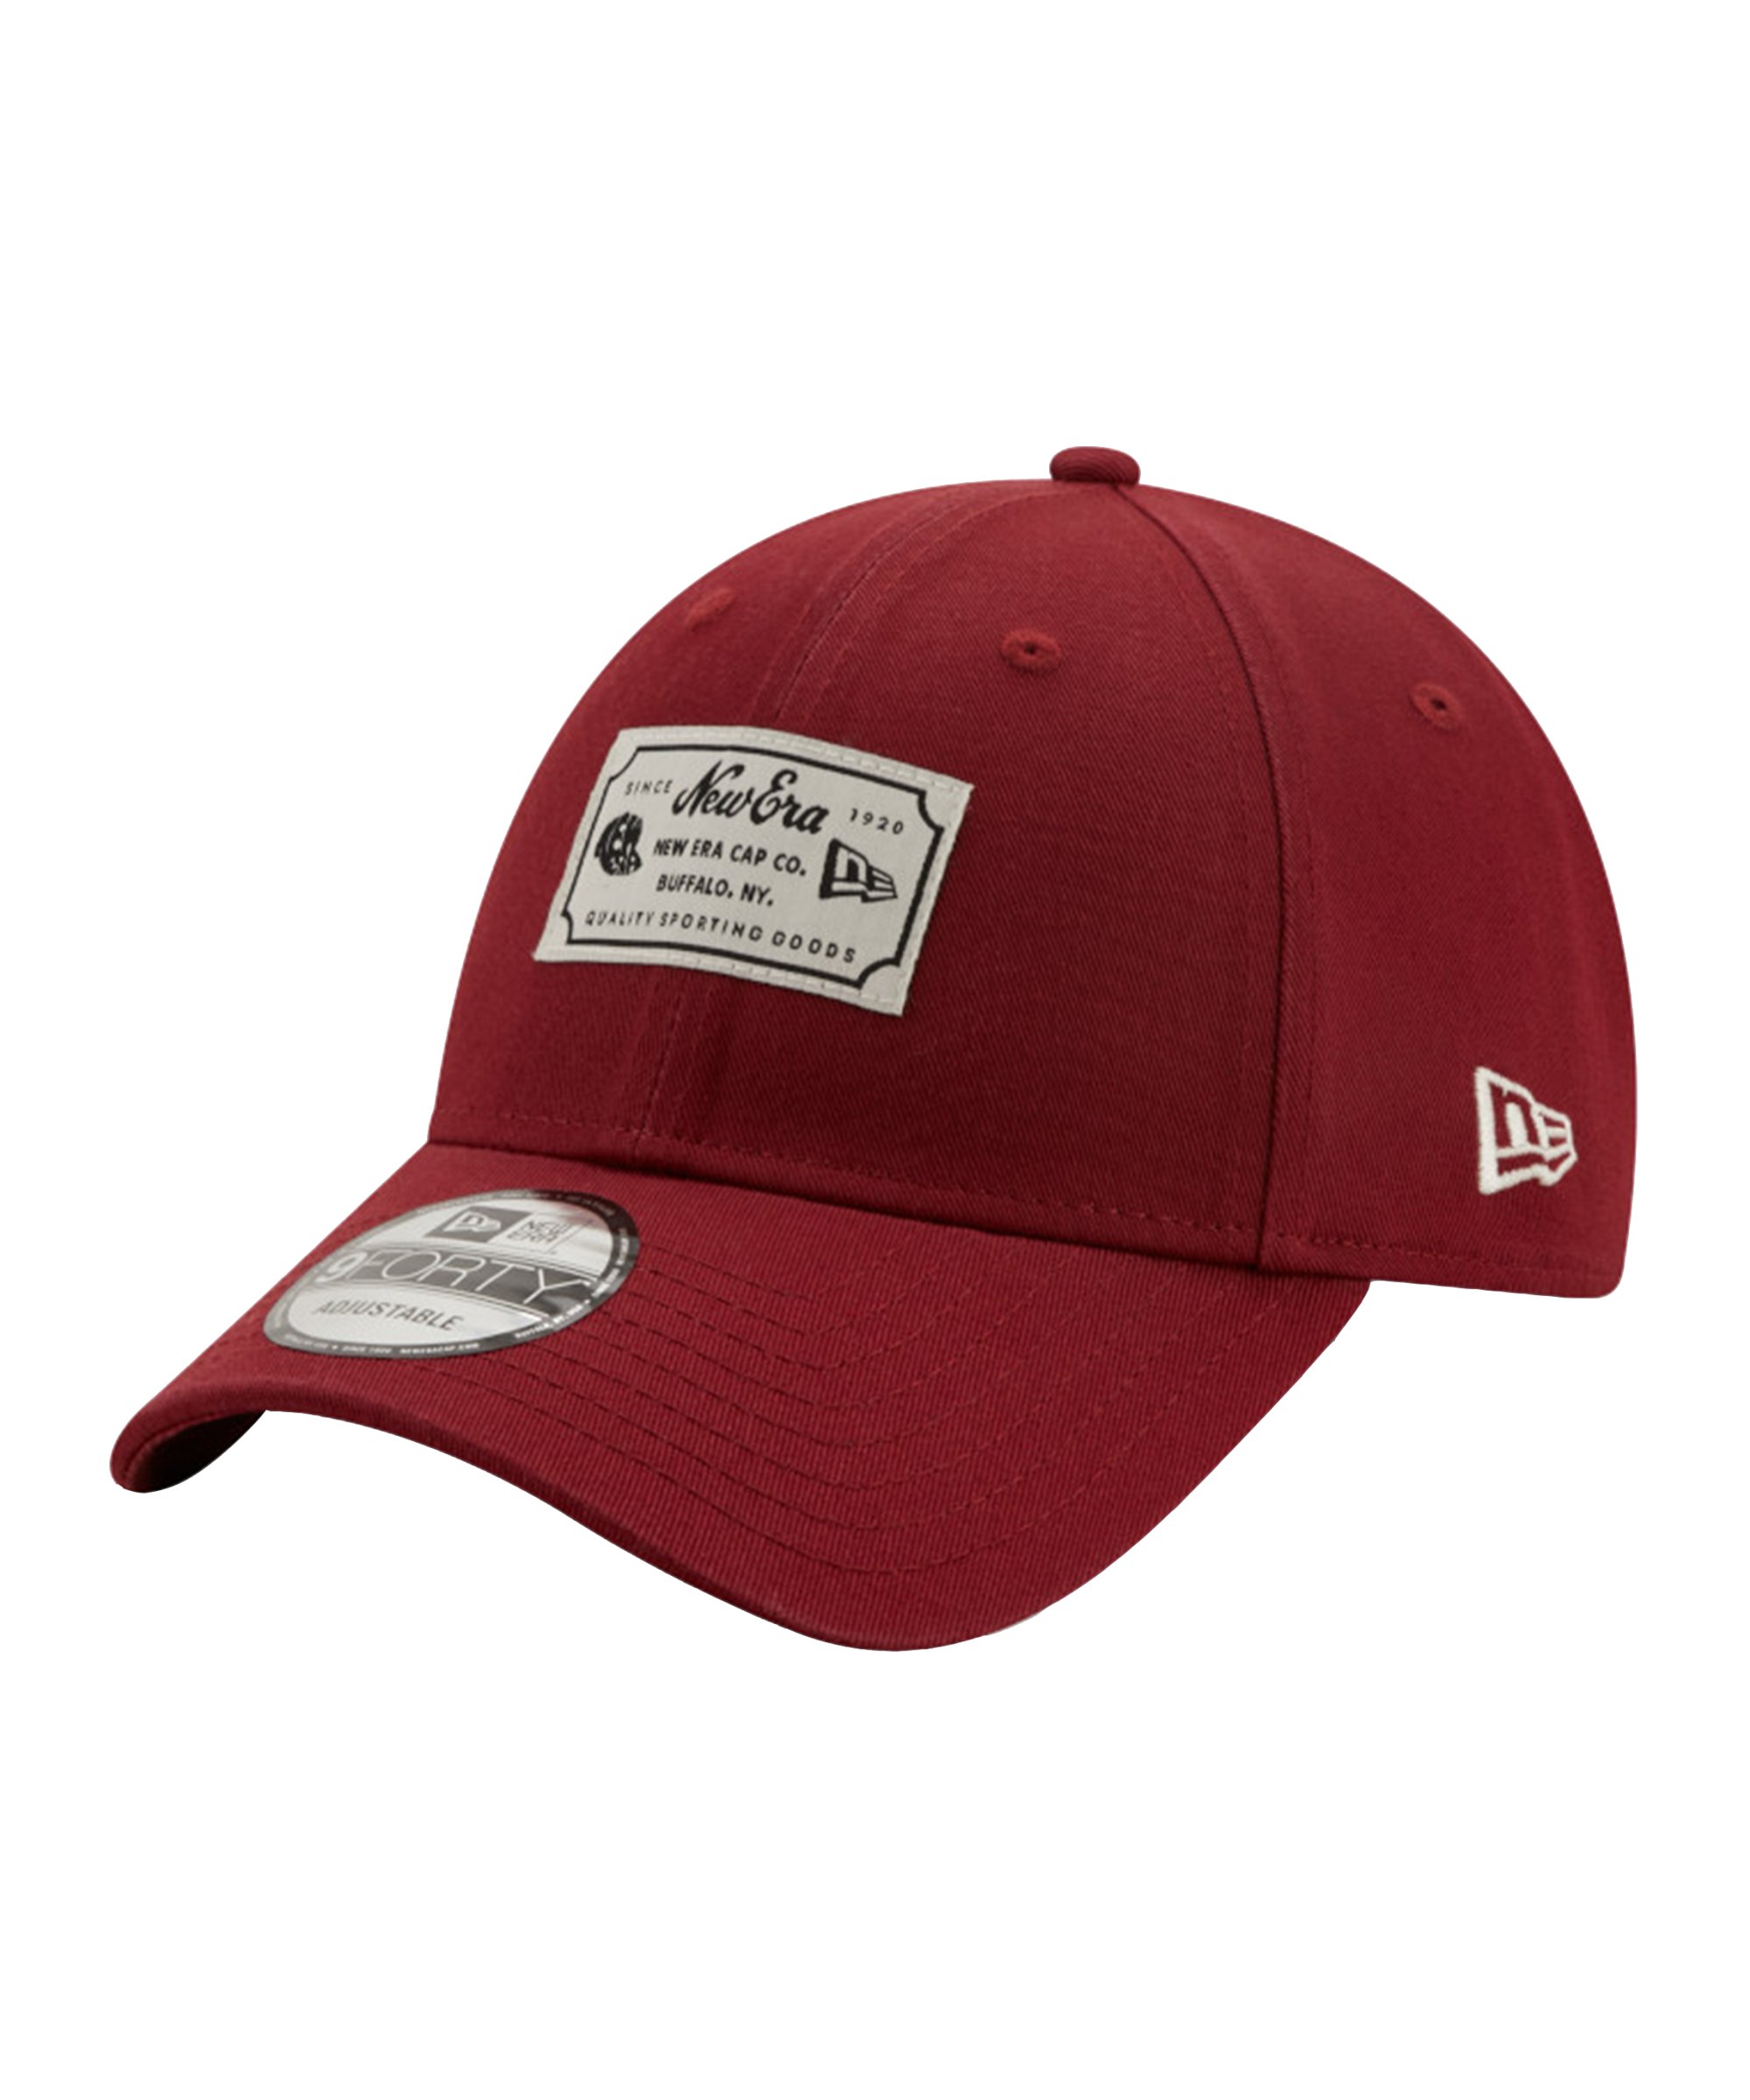 New Era Heritage 9Forty Cap Rot FCAR - rot